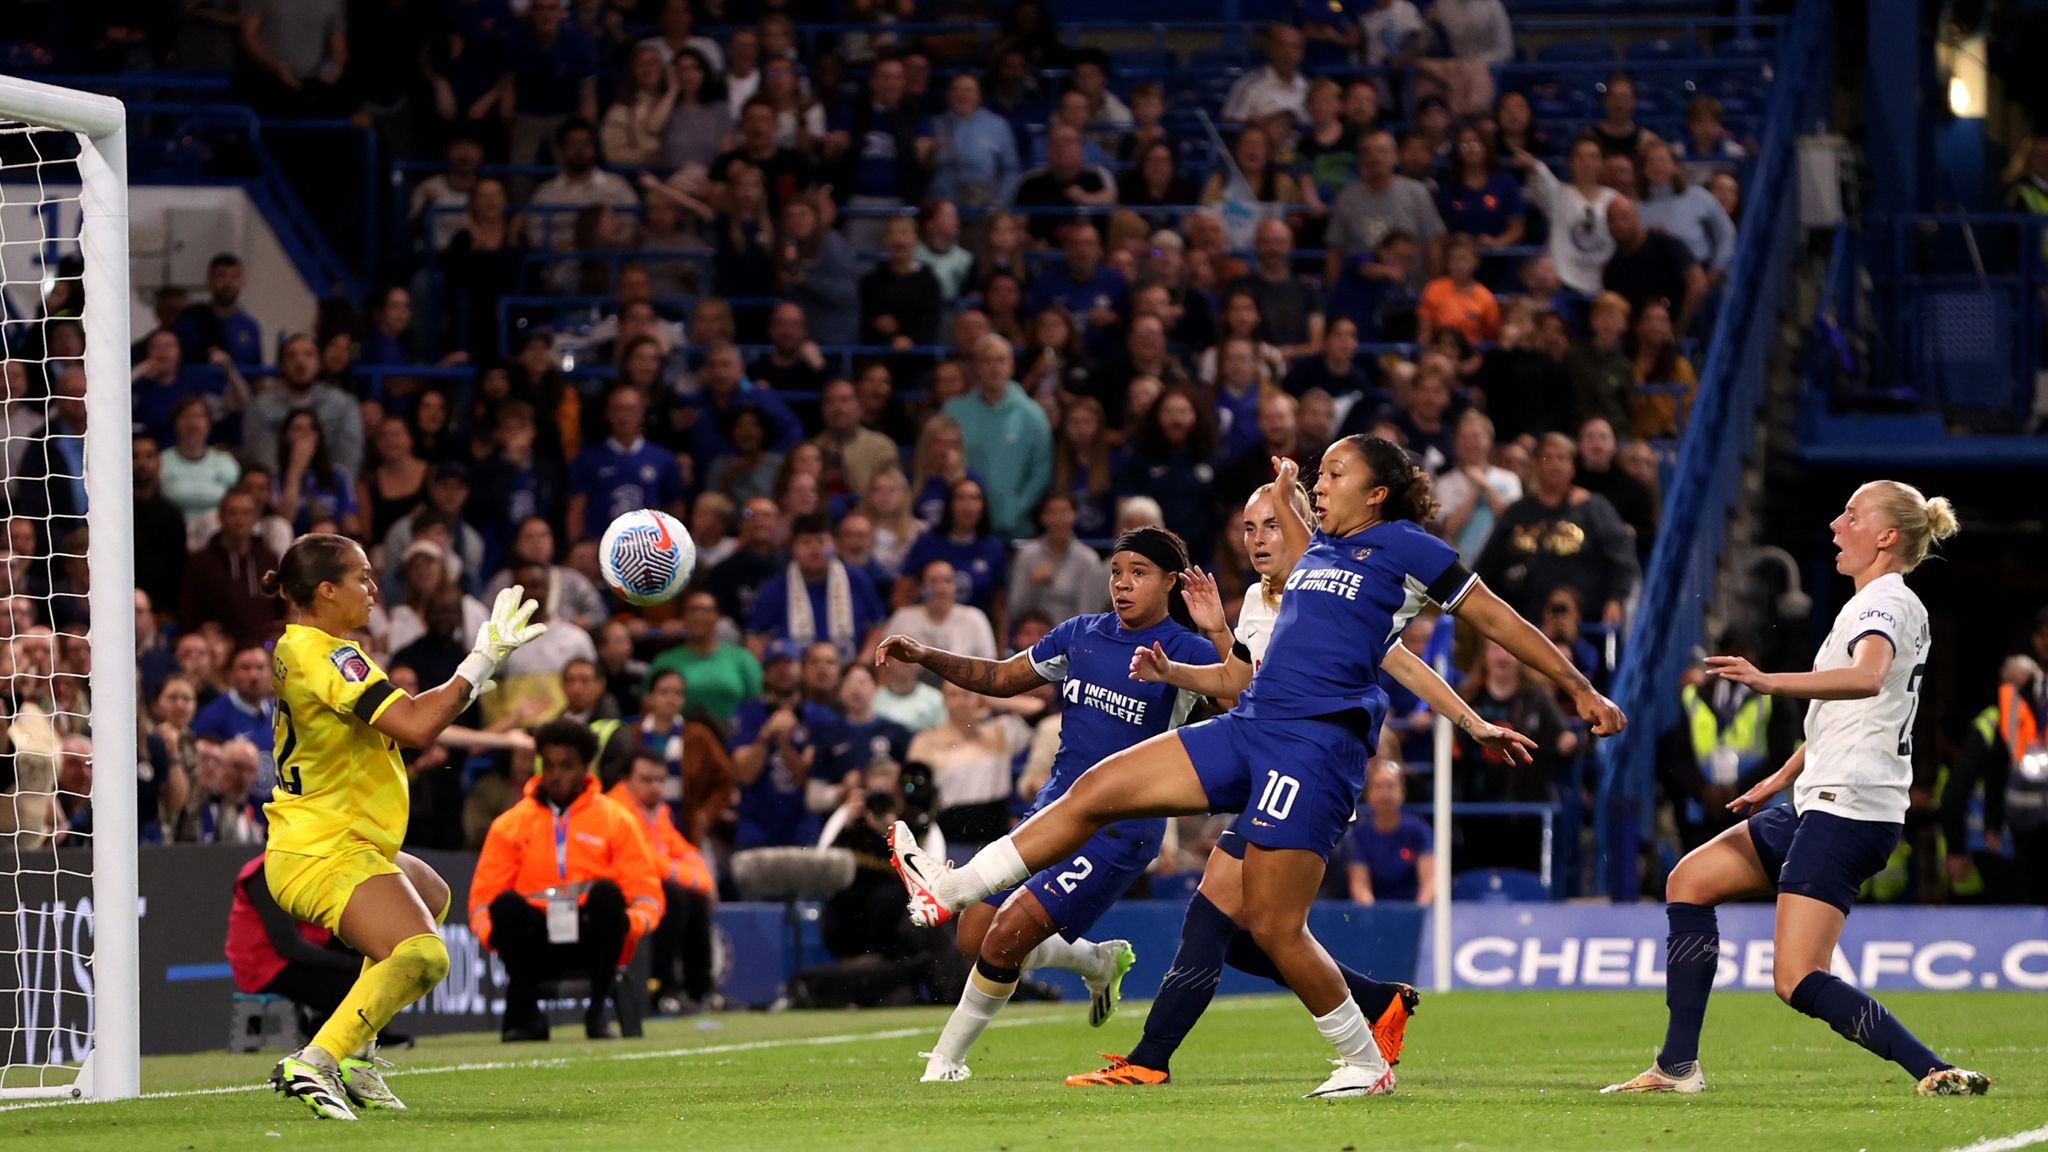 Chelsea Women vs Tottenham Women WSL LIVE! Match commentary, in-game clips, team news, live on Sky Sports Football News Sky Sports